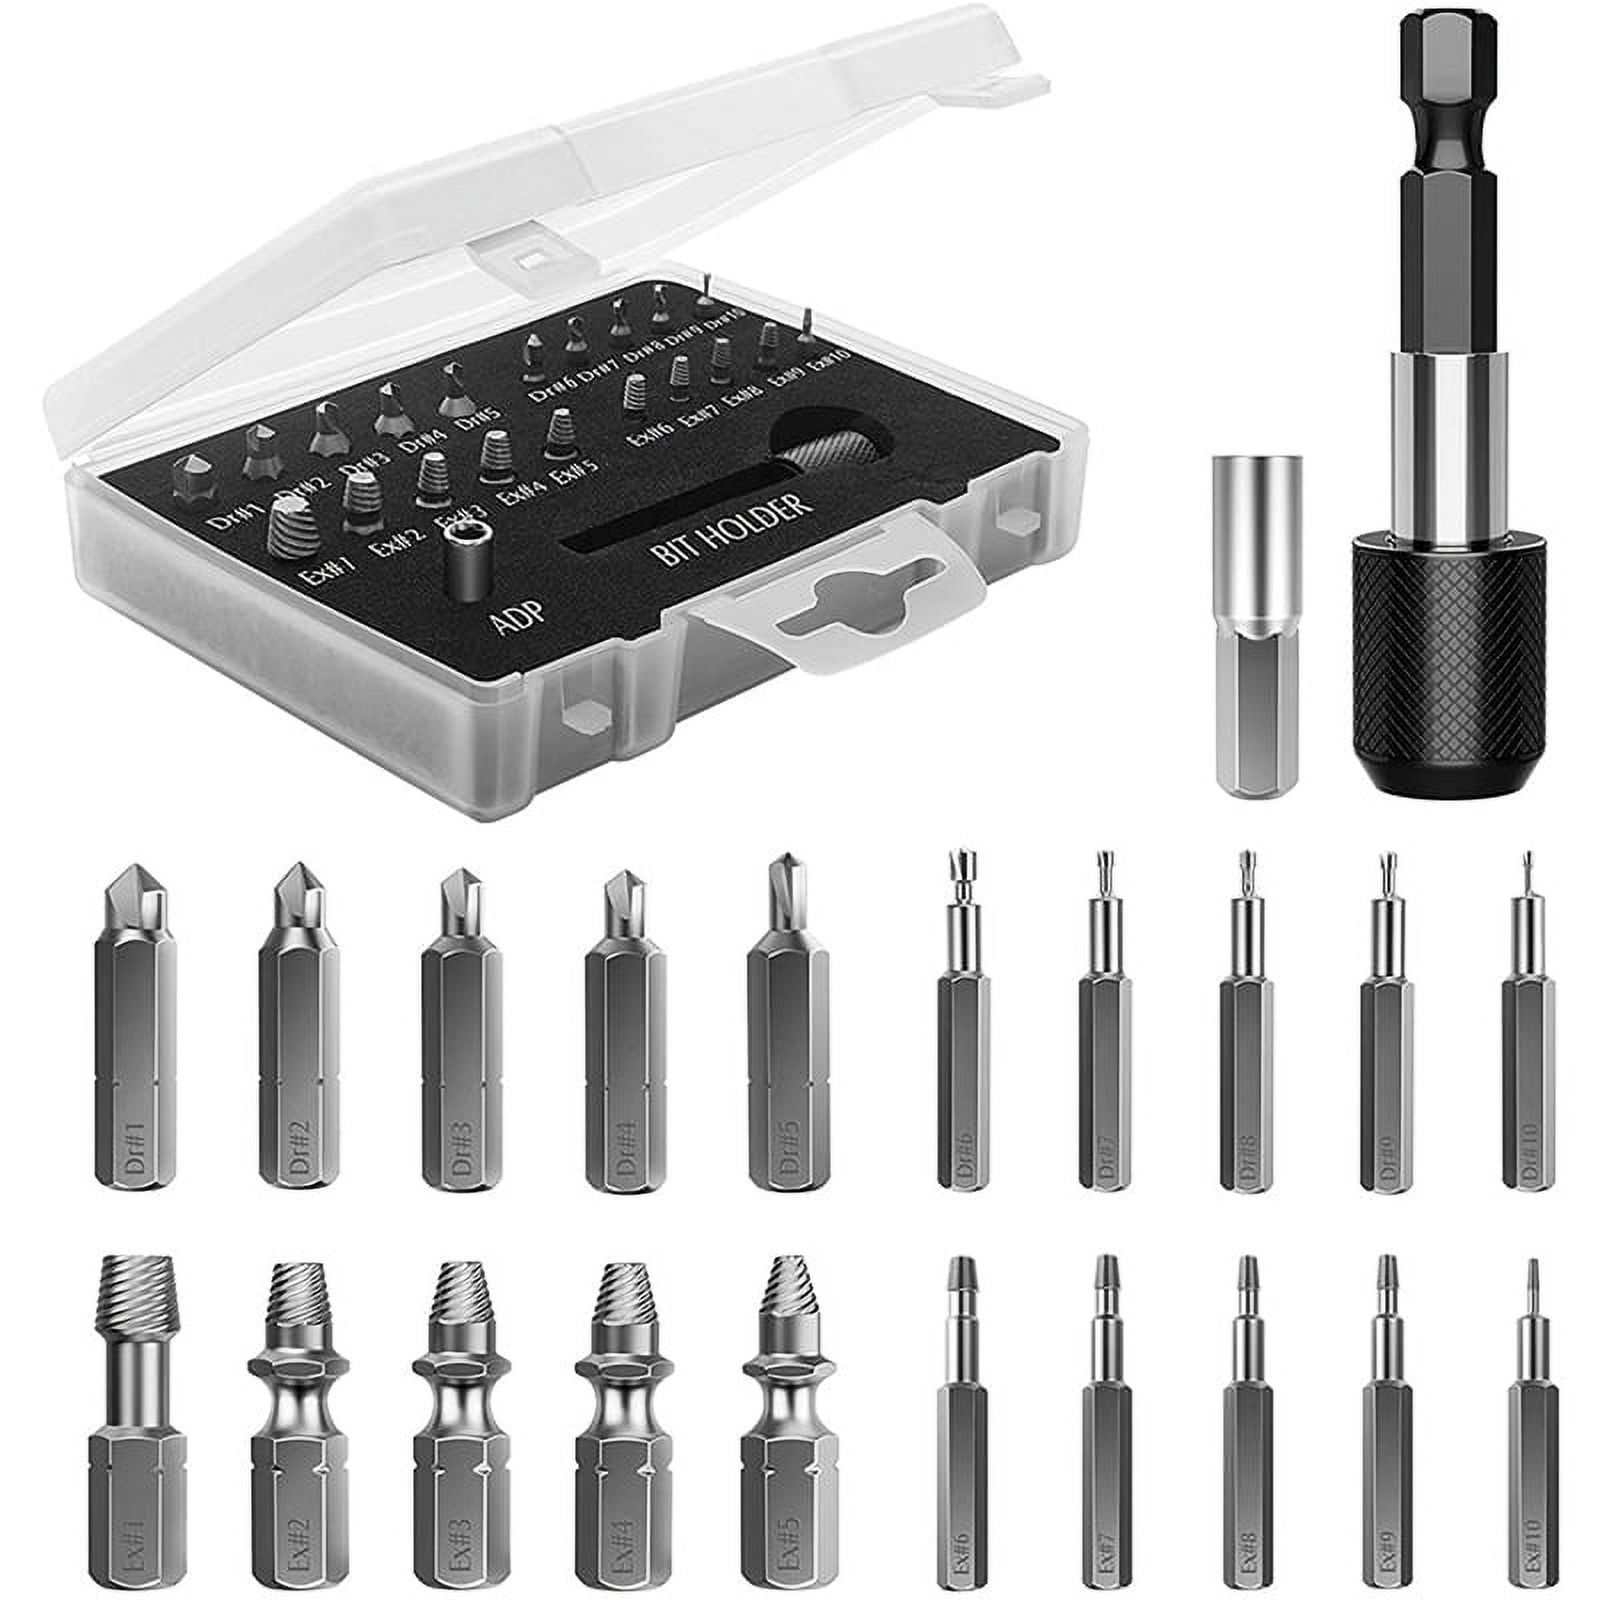 Grabit Broken Bolt and Damaged Screw Extractor Kit (2pc / Size 4 - 10)